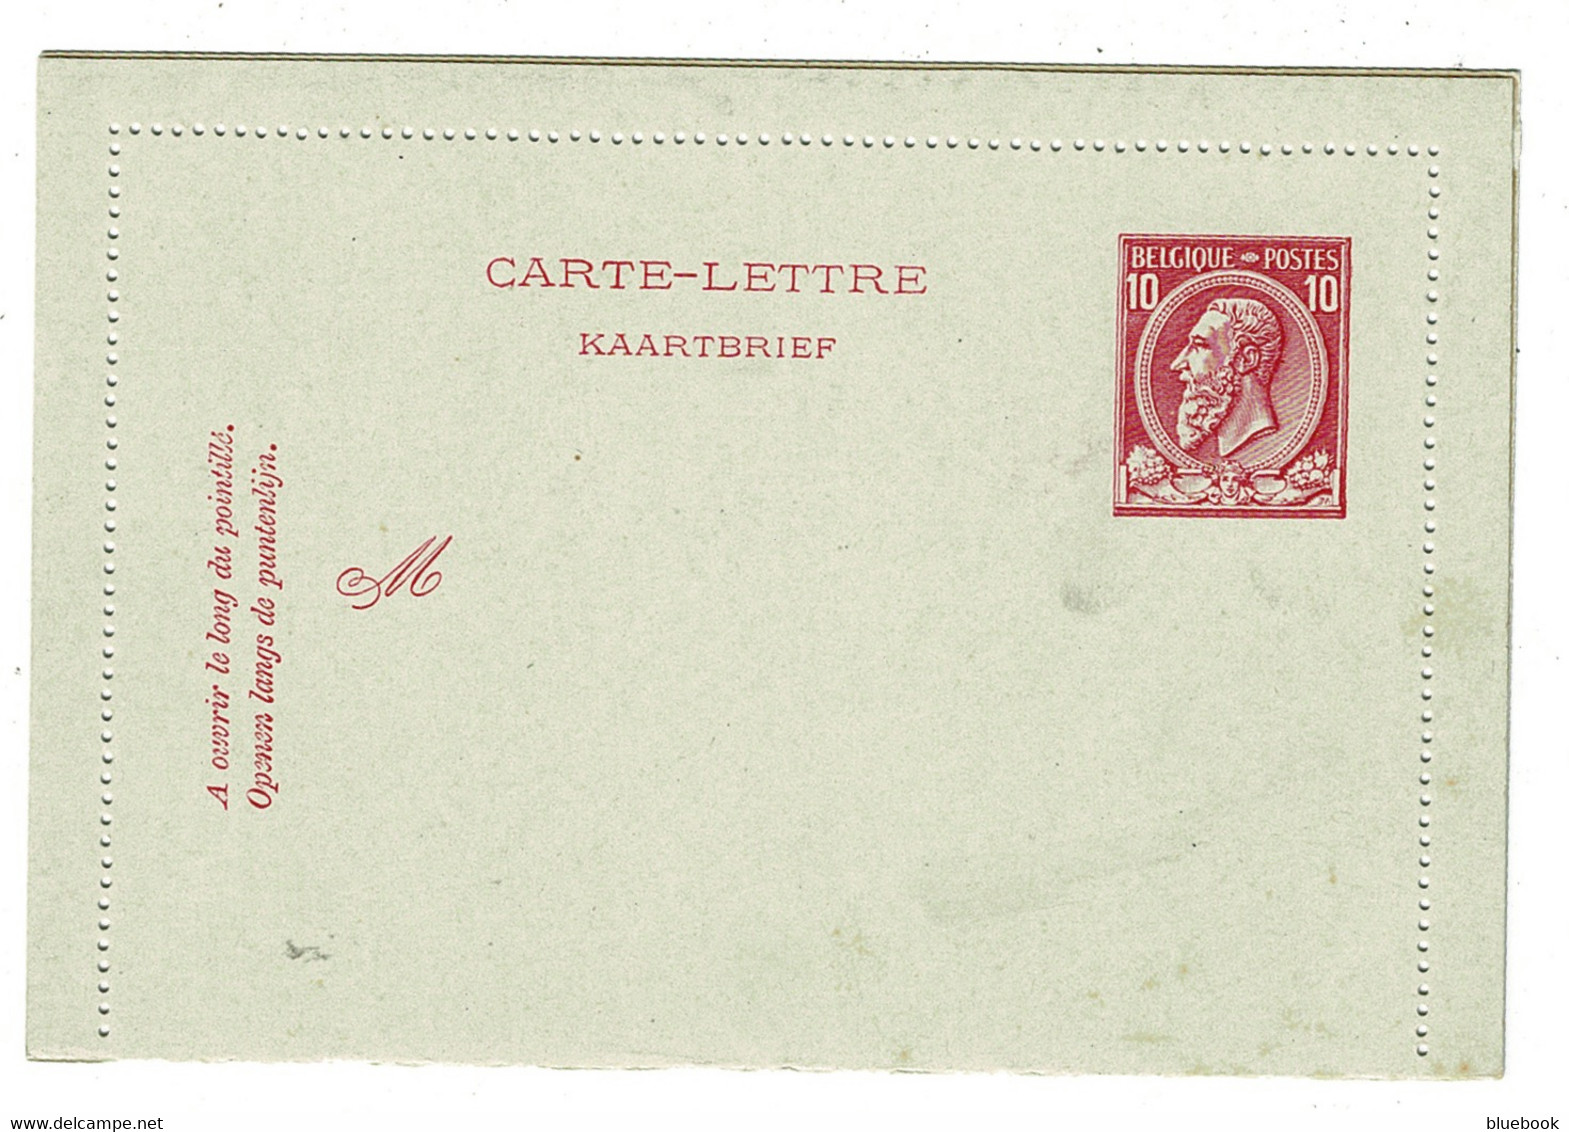 Ref 1436 - Early Belgium 10c Mint Letter Card - Cartes-lettres